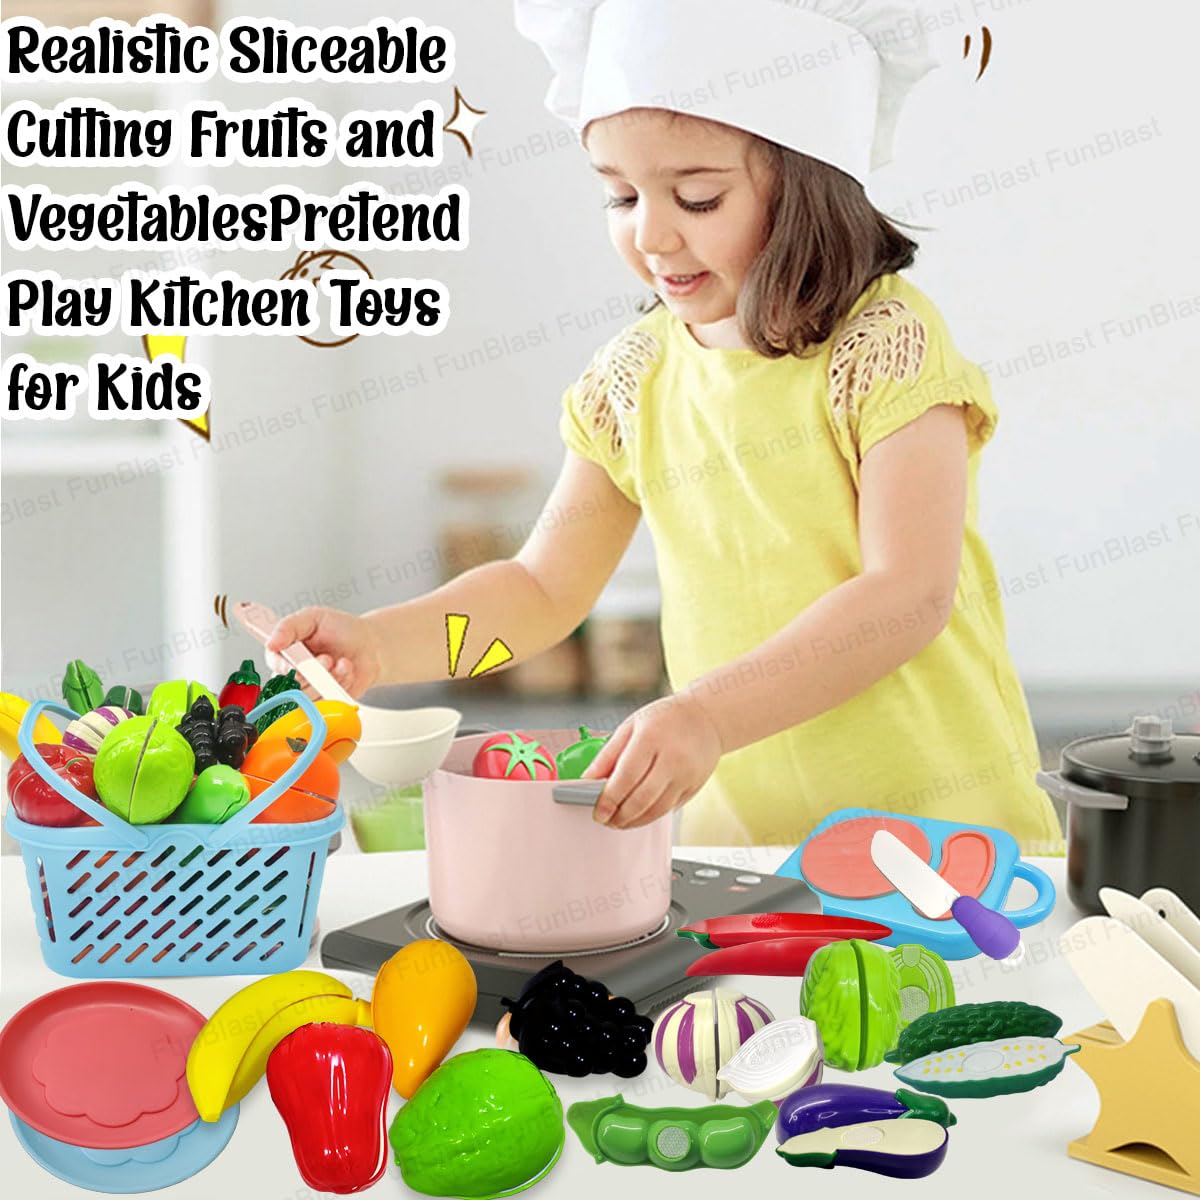 Fruits and Vegetables Play Set Toys, Realistic Sliceable Cutting Pretend Play Kitchen Toys for Kids (17 Pieces)